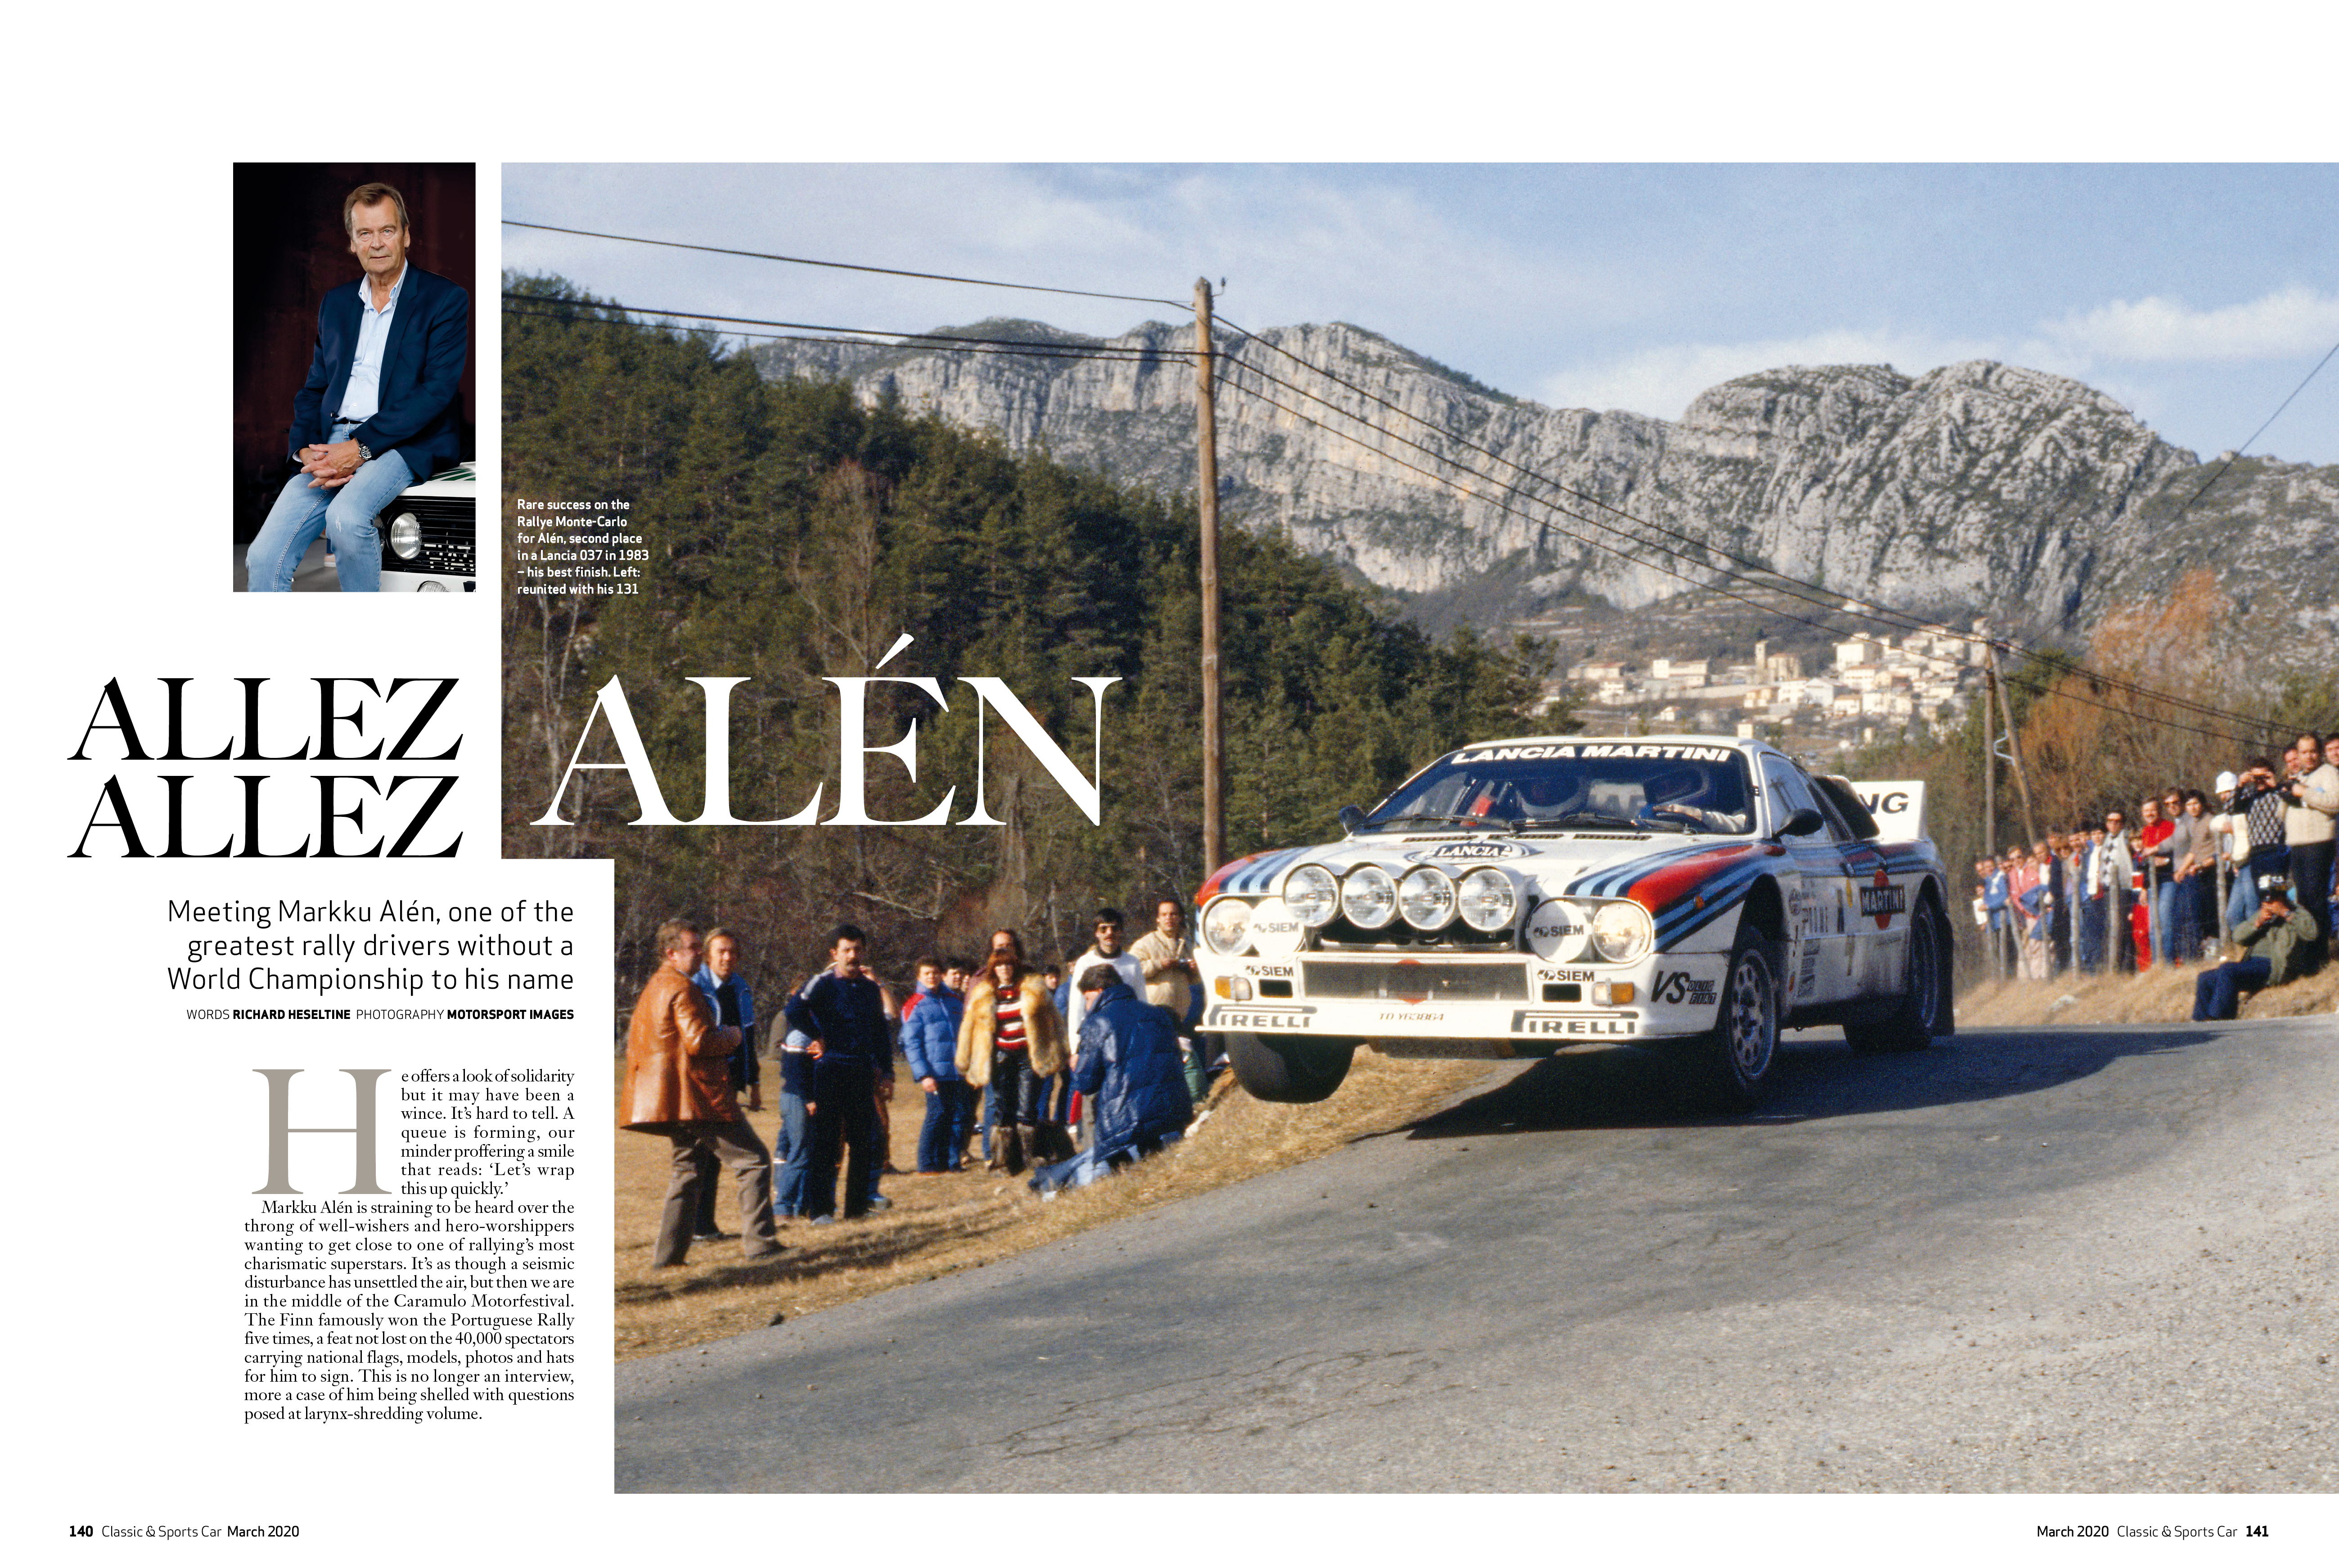 240Z stars in Japanese special: Inside the March 2020 issue of C&SC